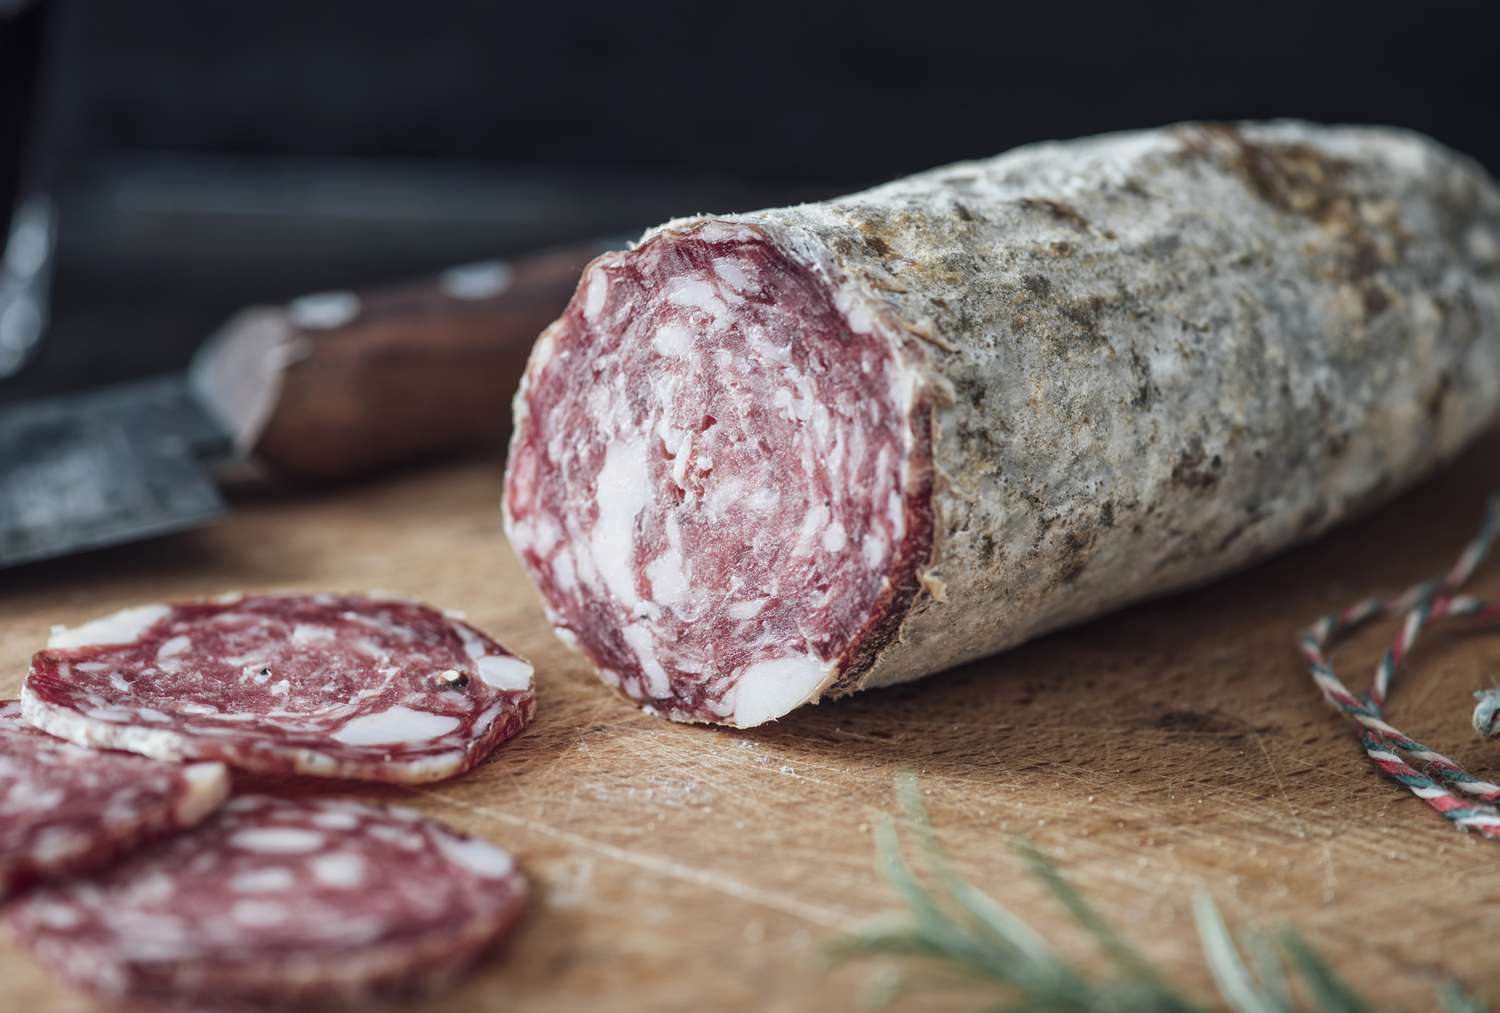 How to Eat Salami From Breakfast to Dinner [Video]